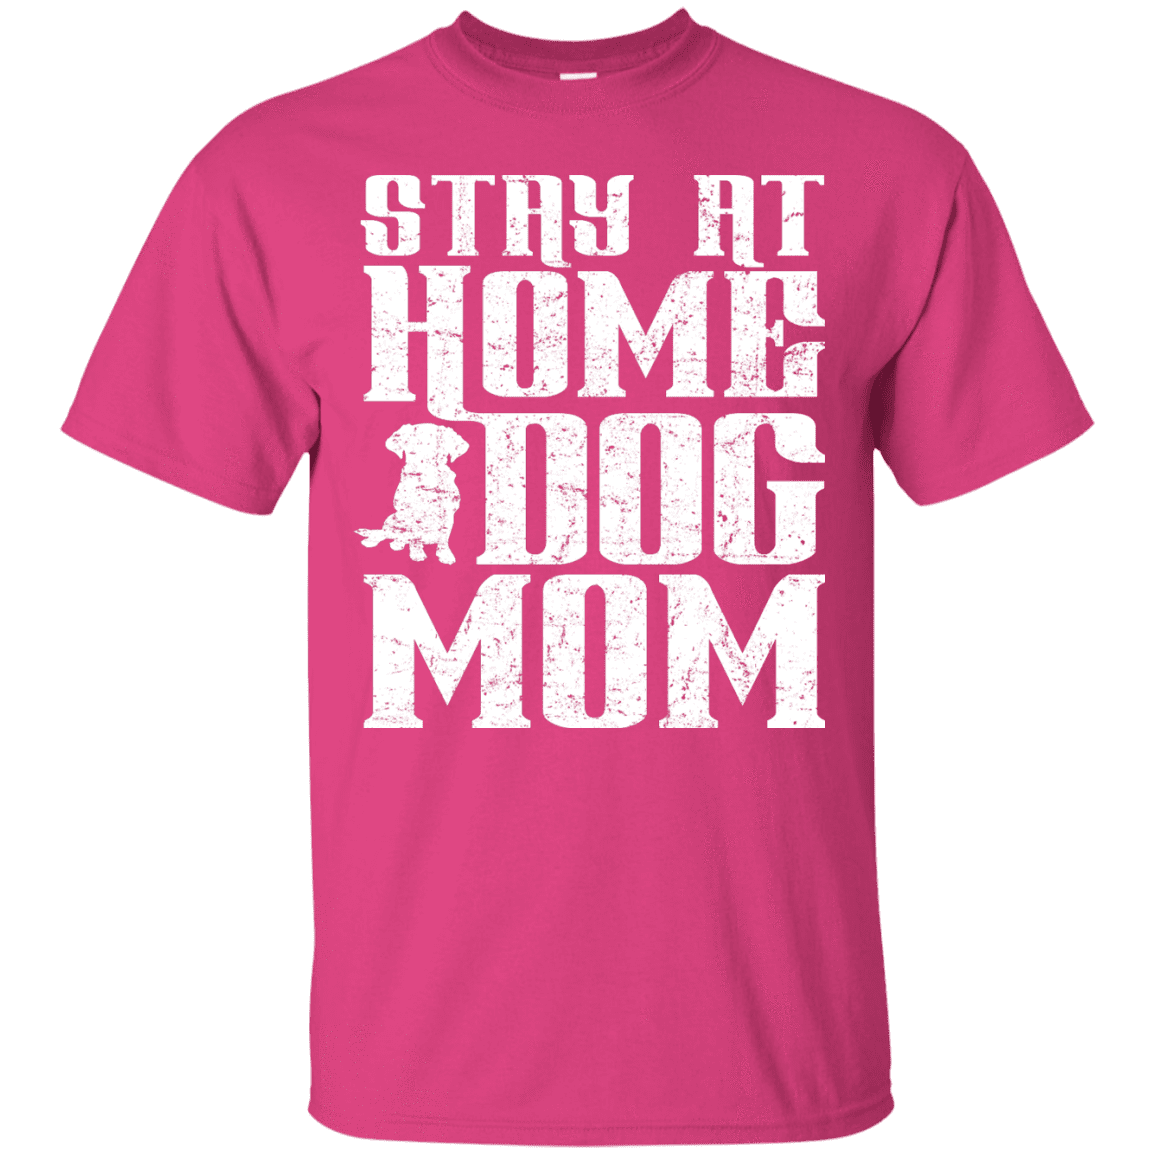 Stay At Home Dog Mom - T Shirt.